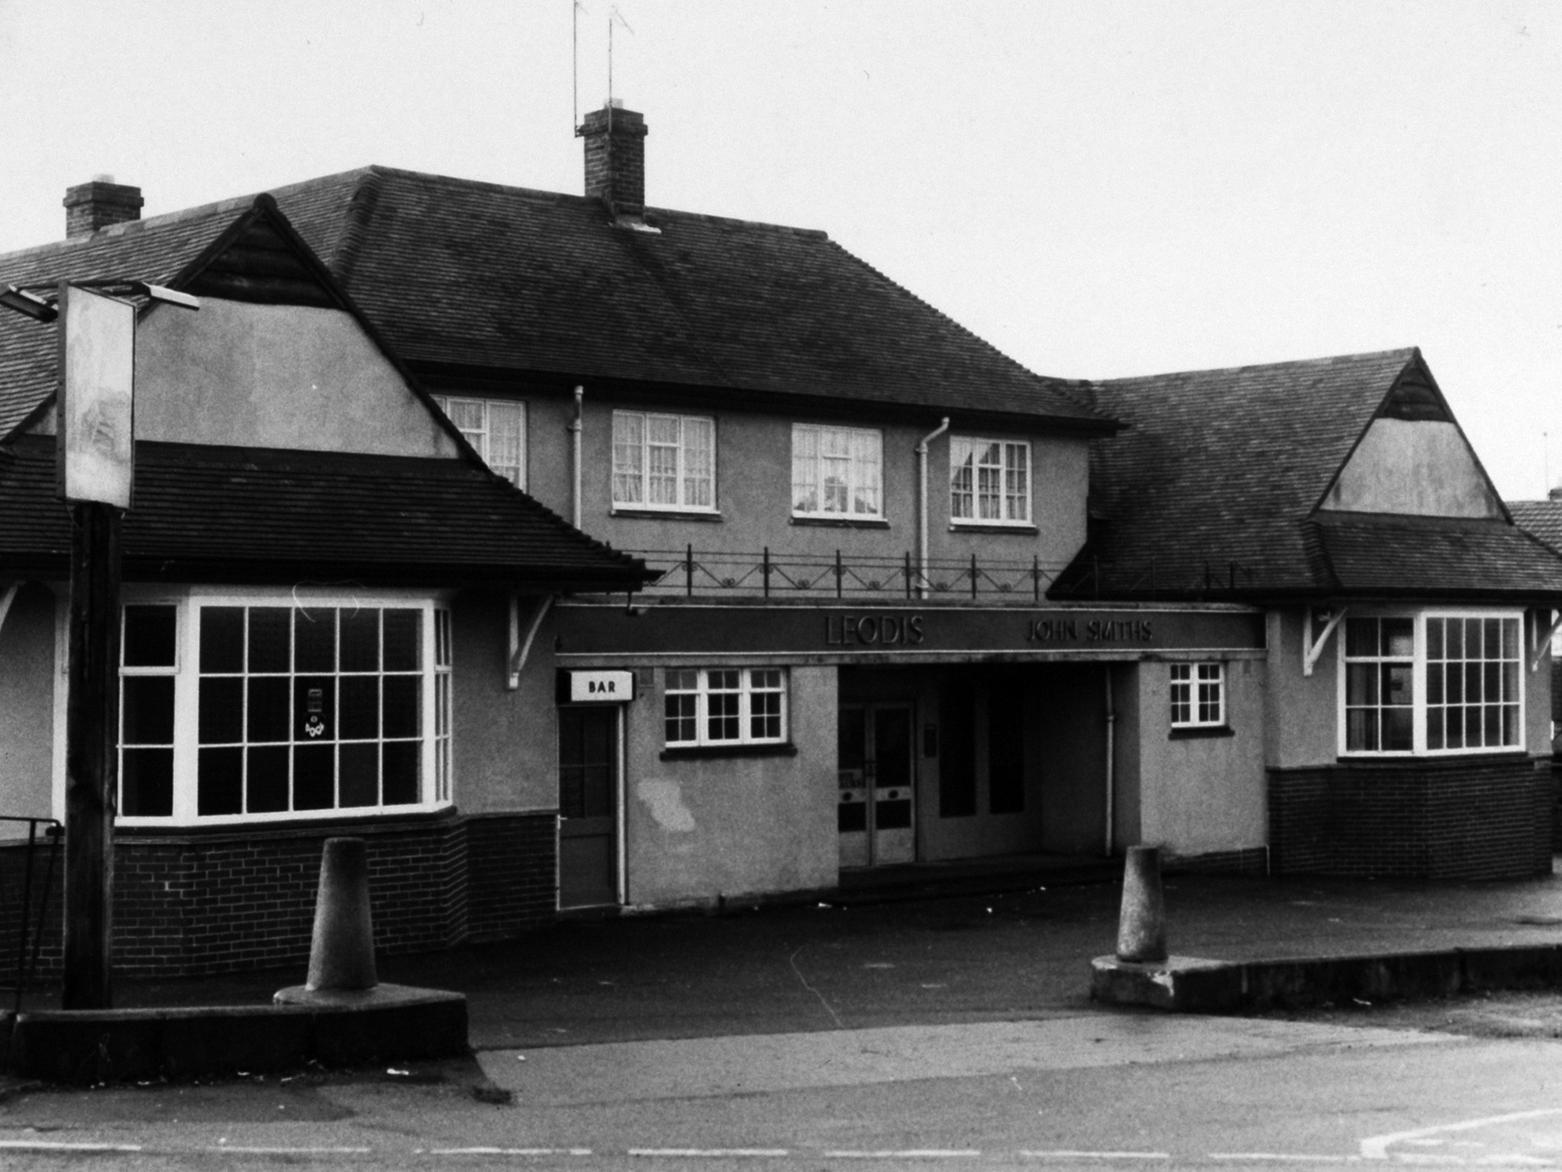 Where you a regular at The Leodis pub in Halton back in the day?